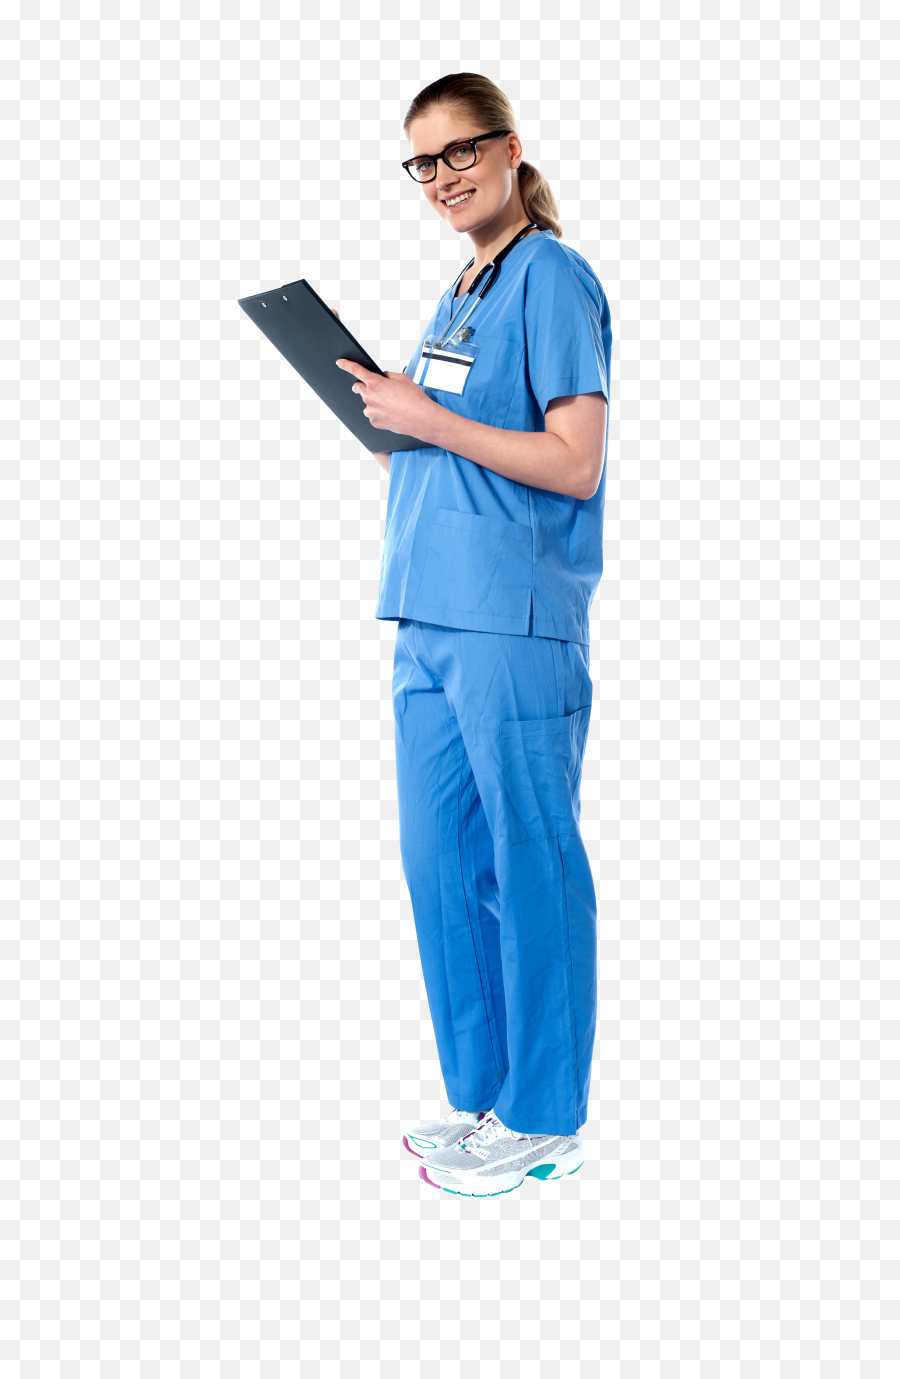 Women Doctor Png Image - Purepng Free Transparent Cc0 Png Stethoscope,Doctor Who Png